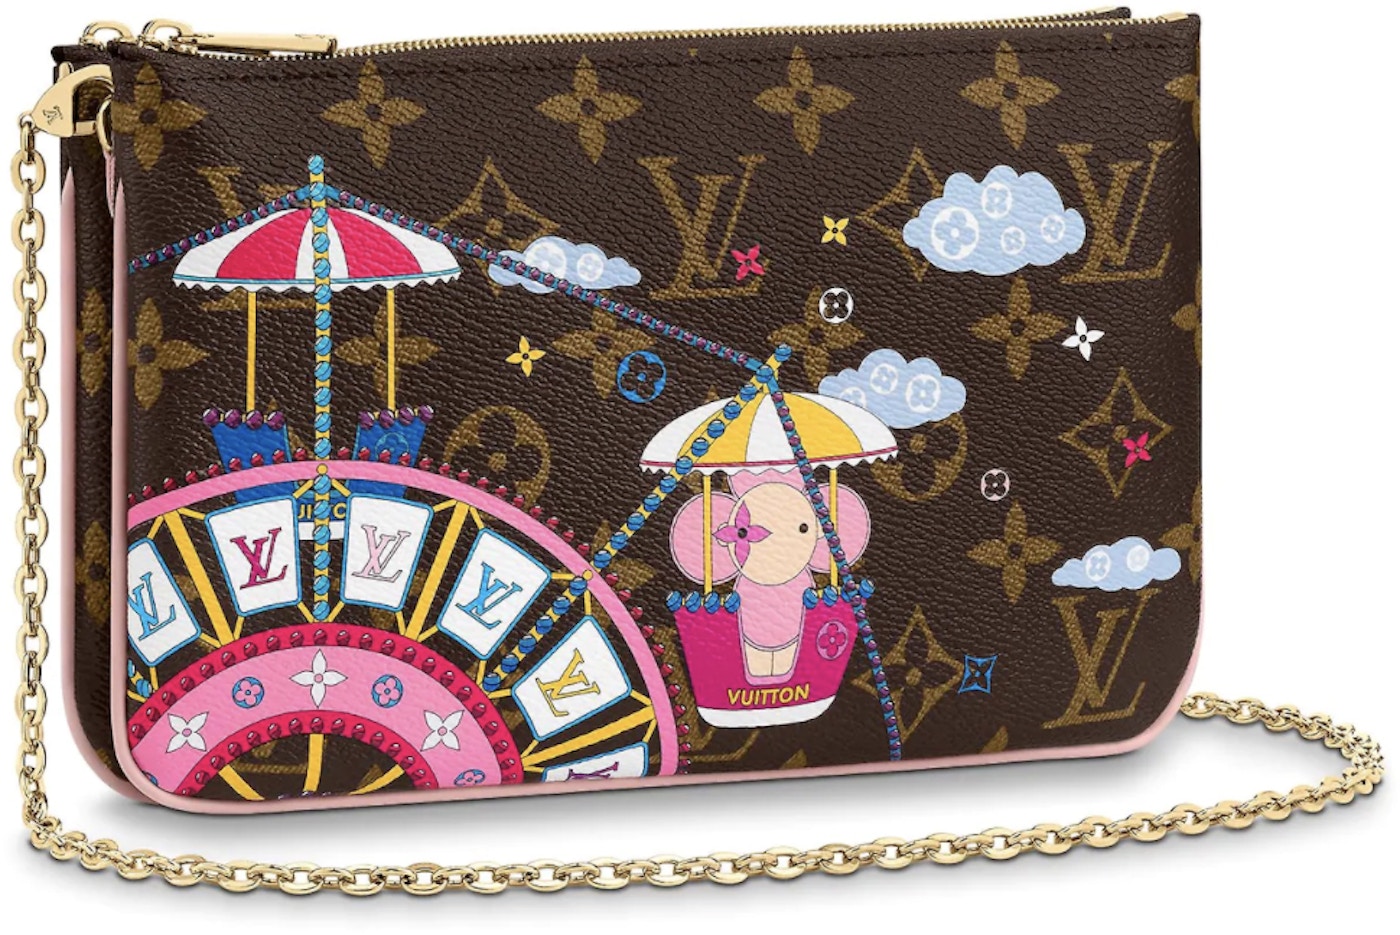 Time For The Holidays With Louis Vuitton's Vivienne Capsule - BAGAHOLICBOY